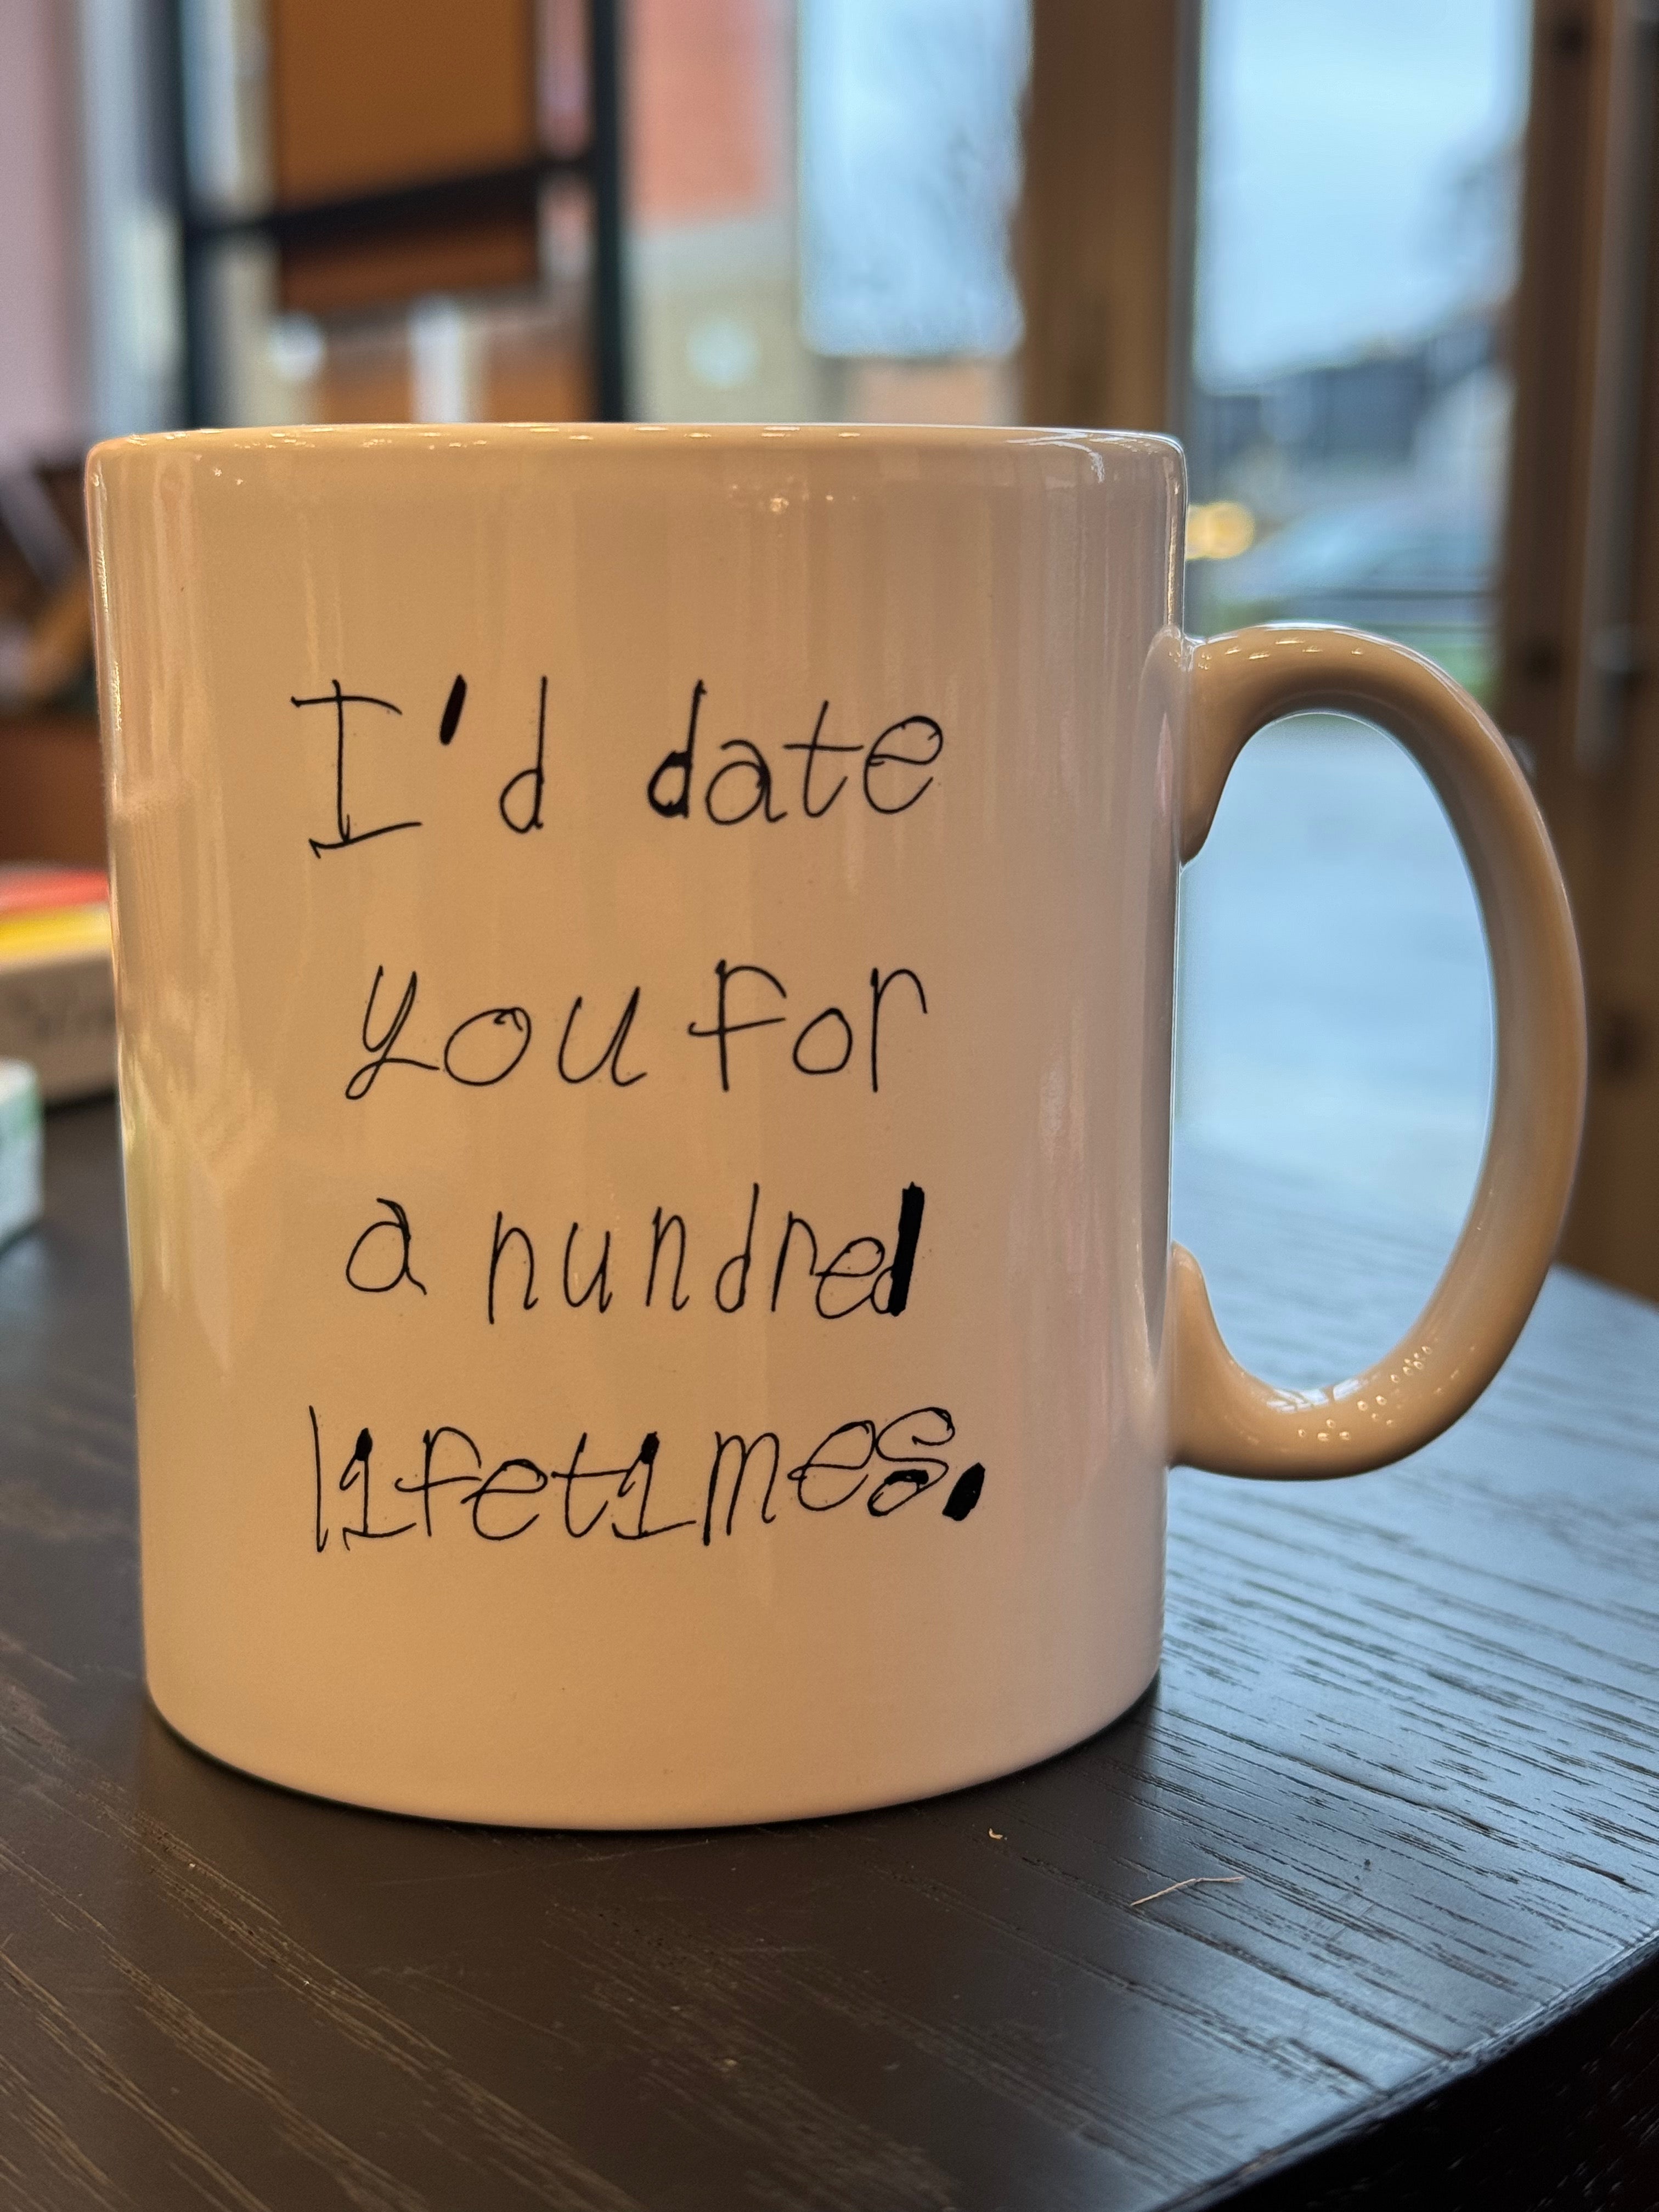 MUG - I'D DATE YOU by NOTES BY PIPER